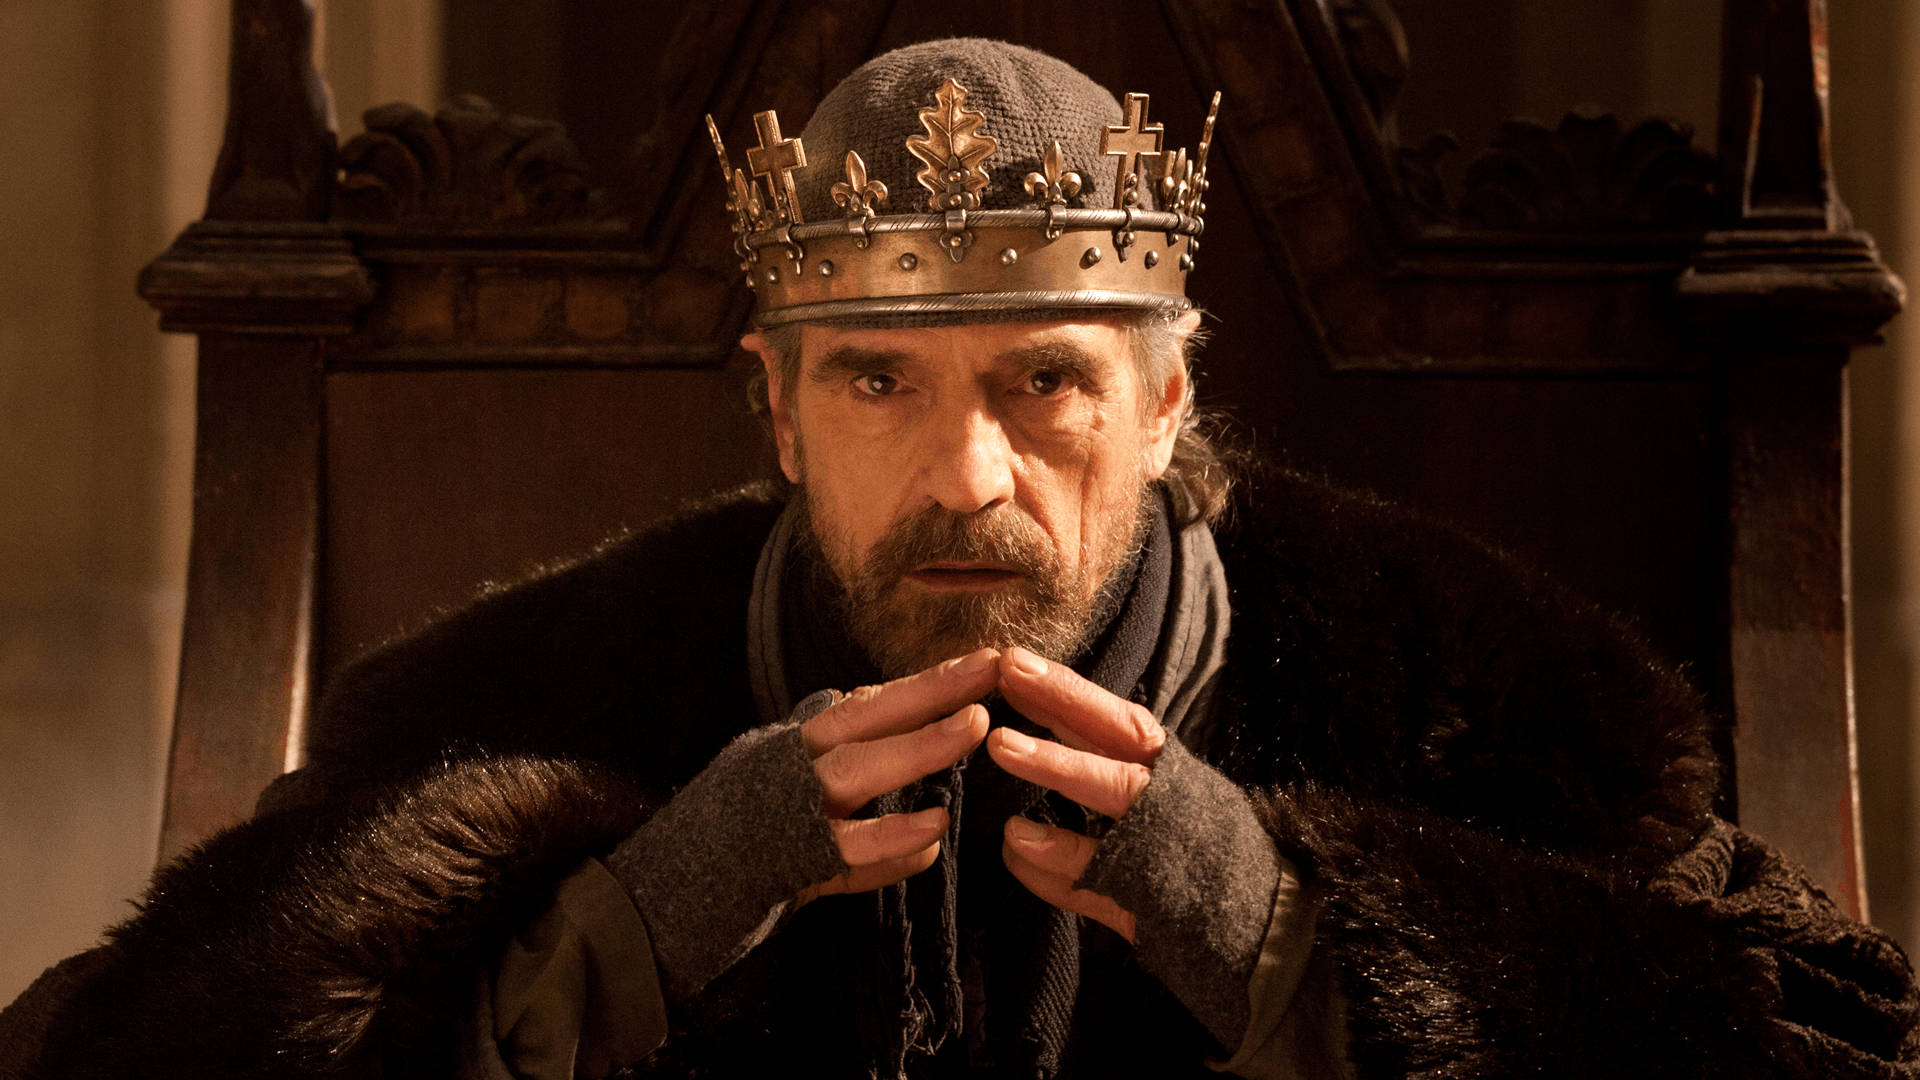 Jeremyirons The Hollow Crown - Jeremy Irons The Hollow Crown Wallpaper